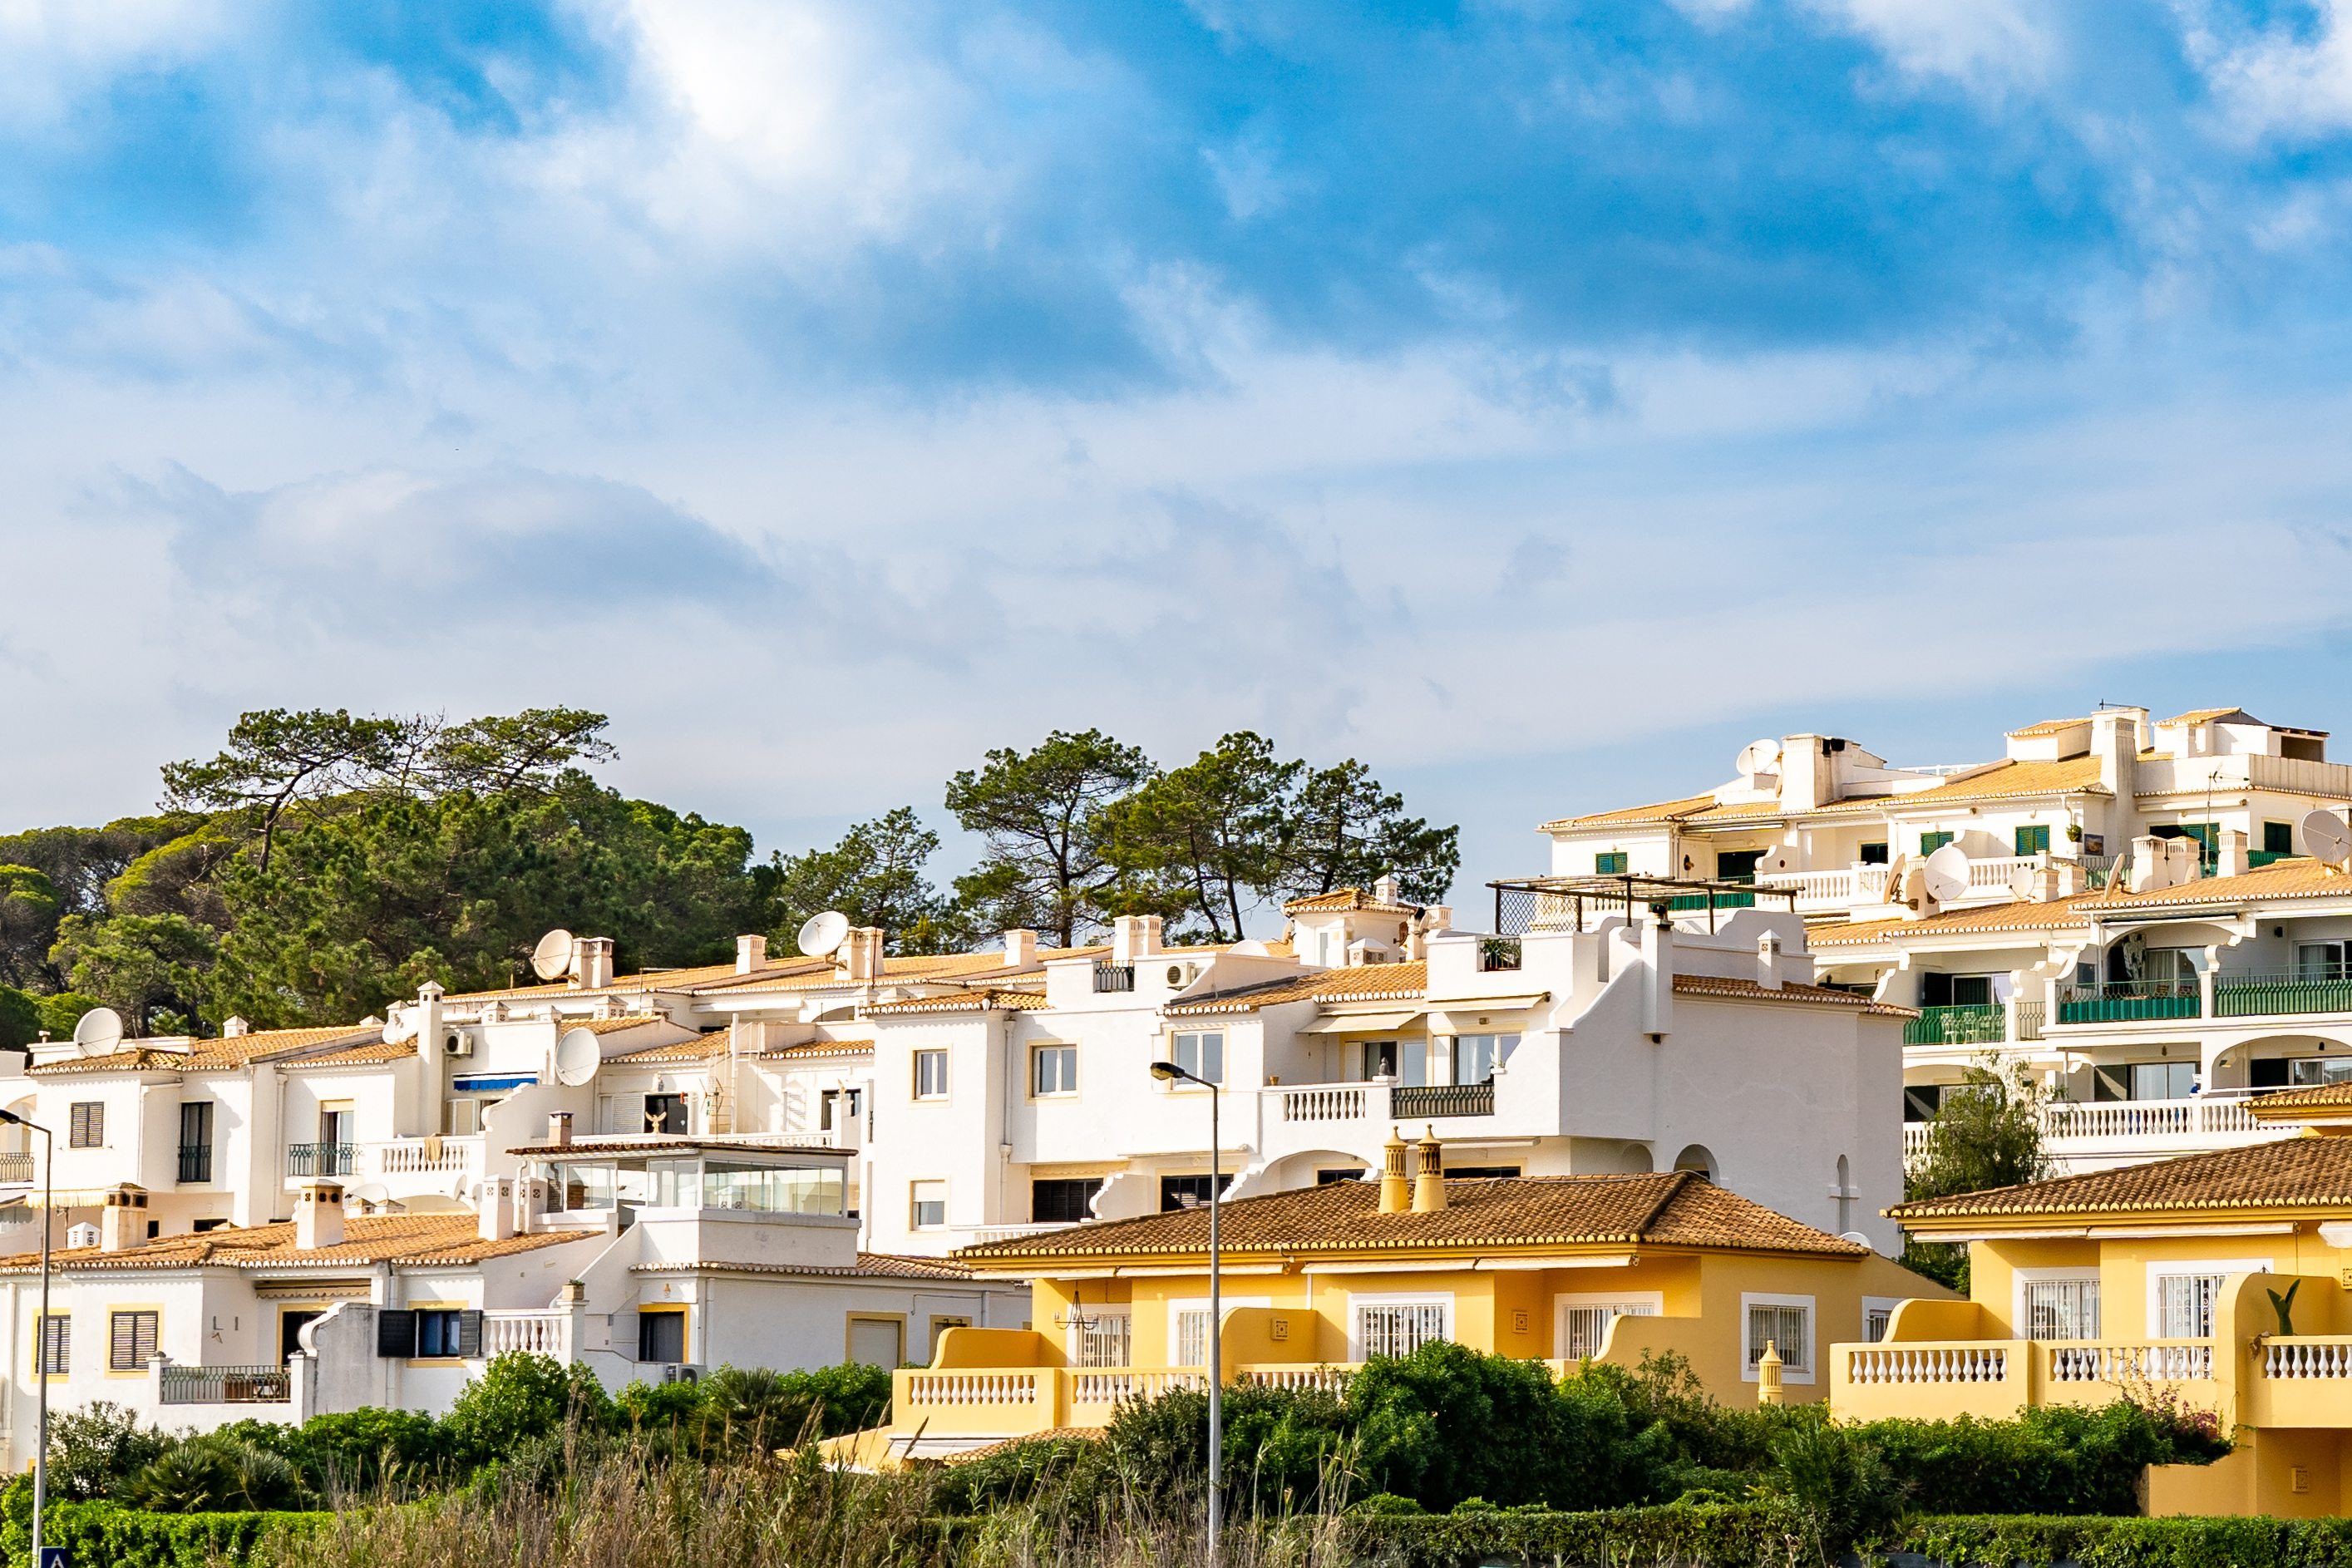 Portuguese property, through the purchase of which they receive a Golden Visa in Portugal